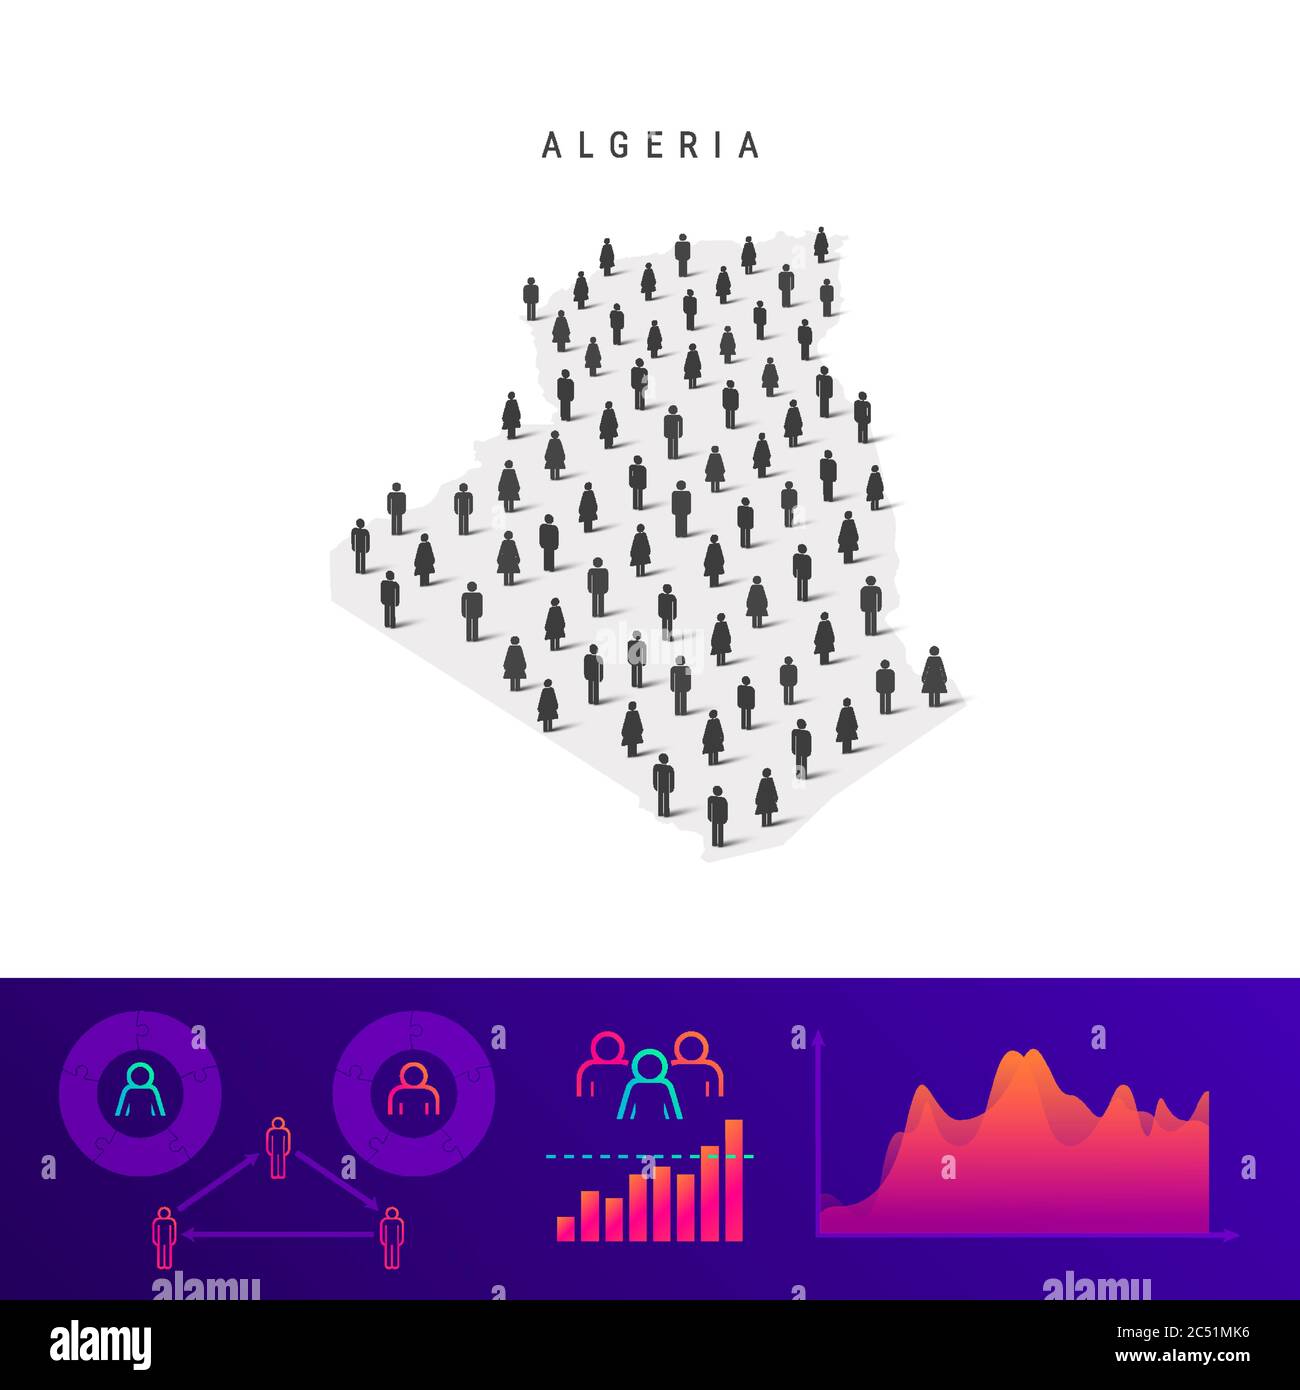 Algeria people map. Detailed vector silhouette. Mixed crowd of men and women icons. Population infographic elements. Vector illustration isolated on w Stock Vector